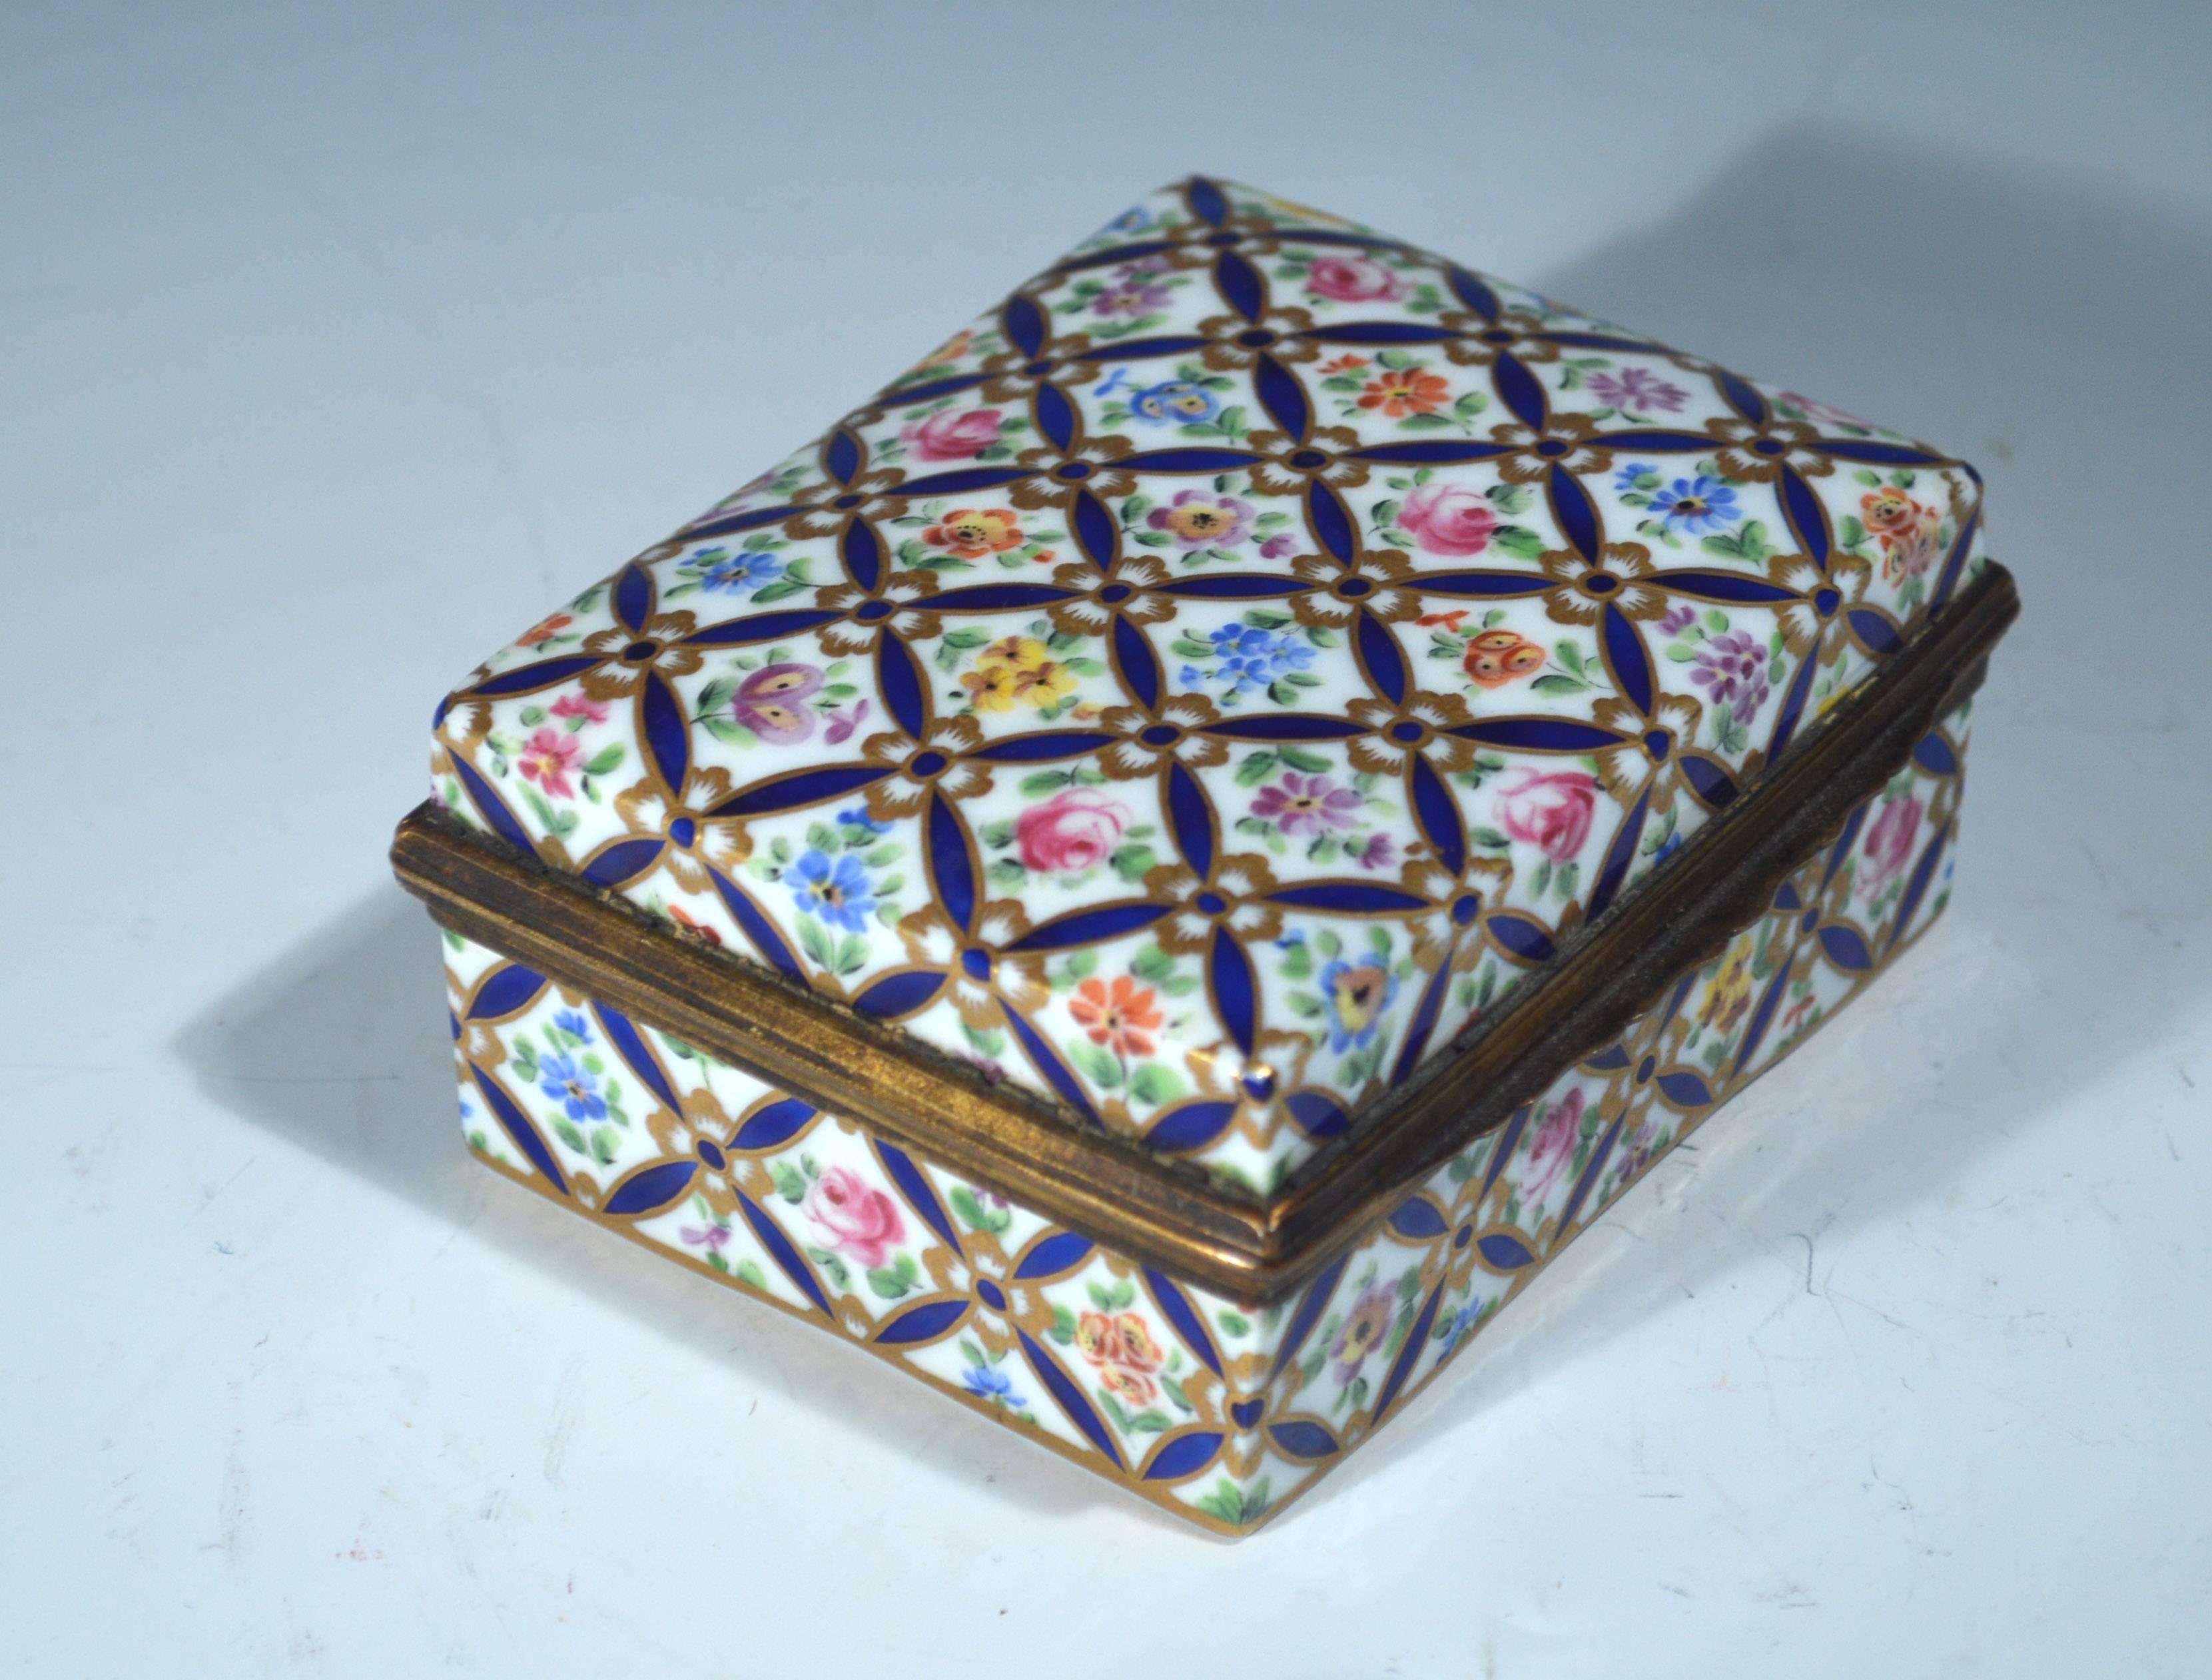 Mounted French porcelain box and cover, 
circa 1880-1900

The rectangular gilt-metal mounted box in the Serves-style painted with a blue trellis design with different flowers in each panel.

Dimensions: 1 3/4 inches x 4 inches x 3 1/4 inches.